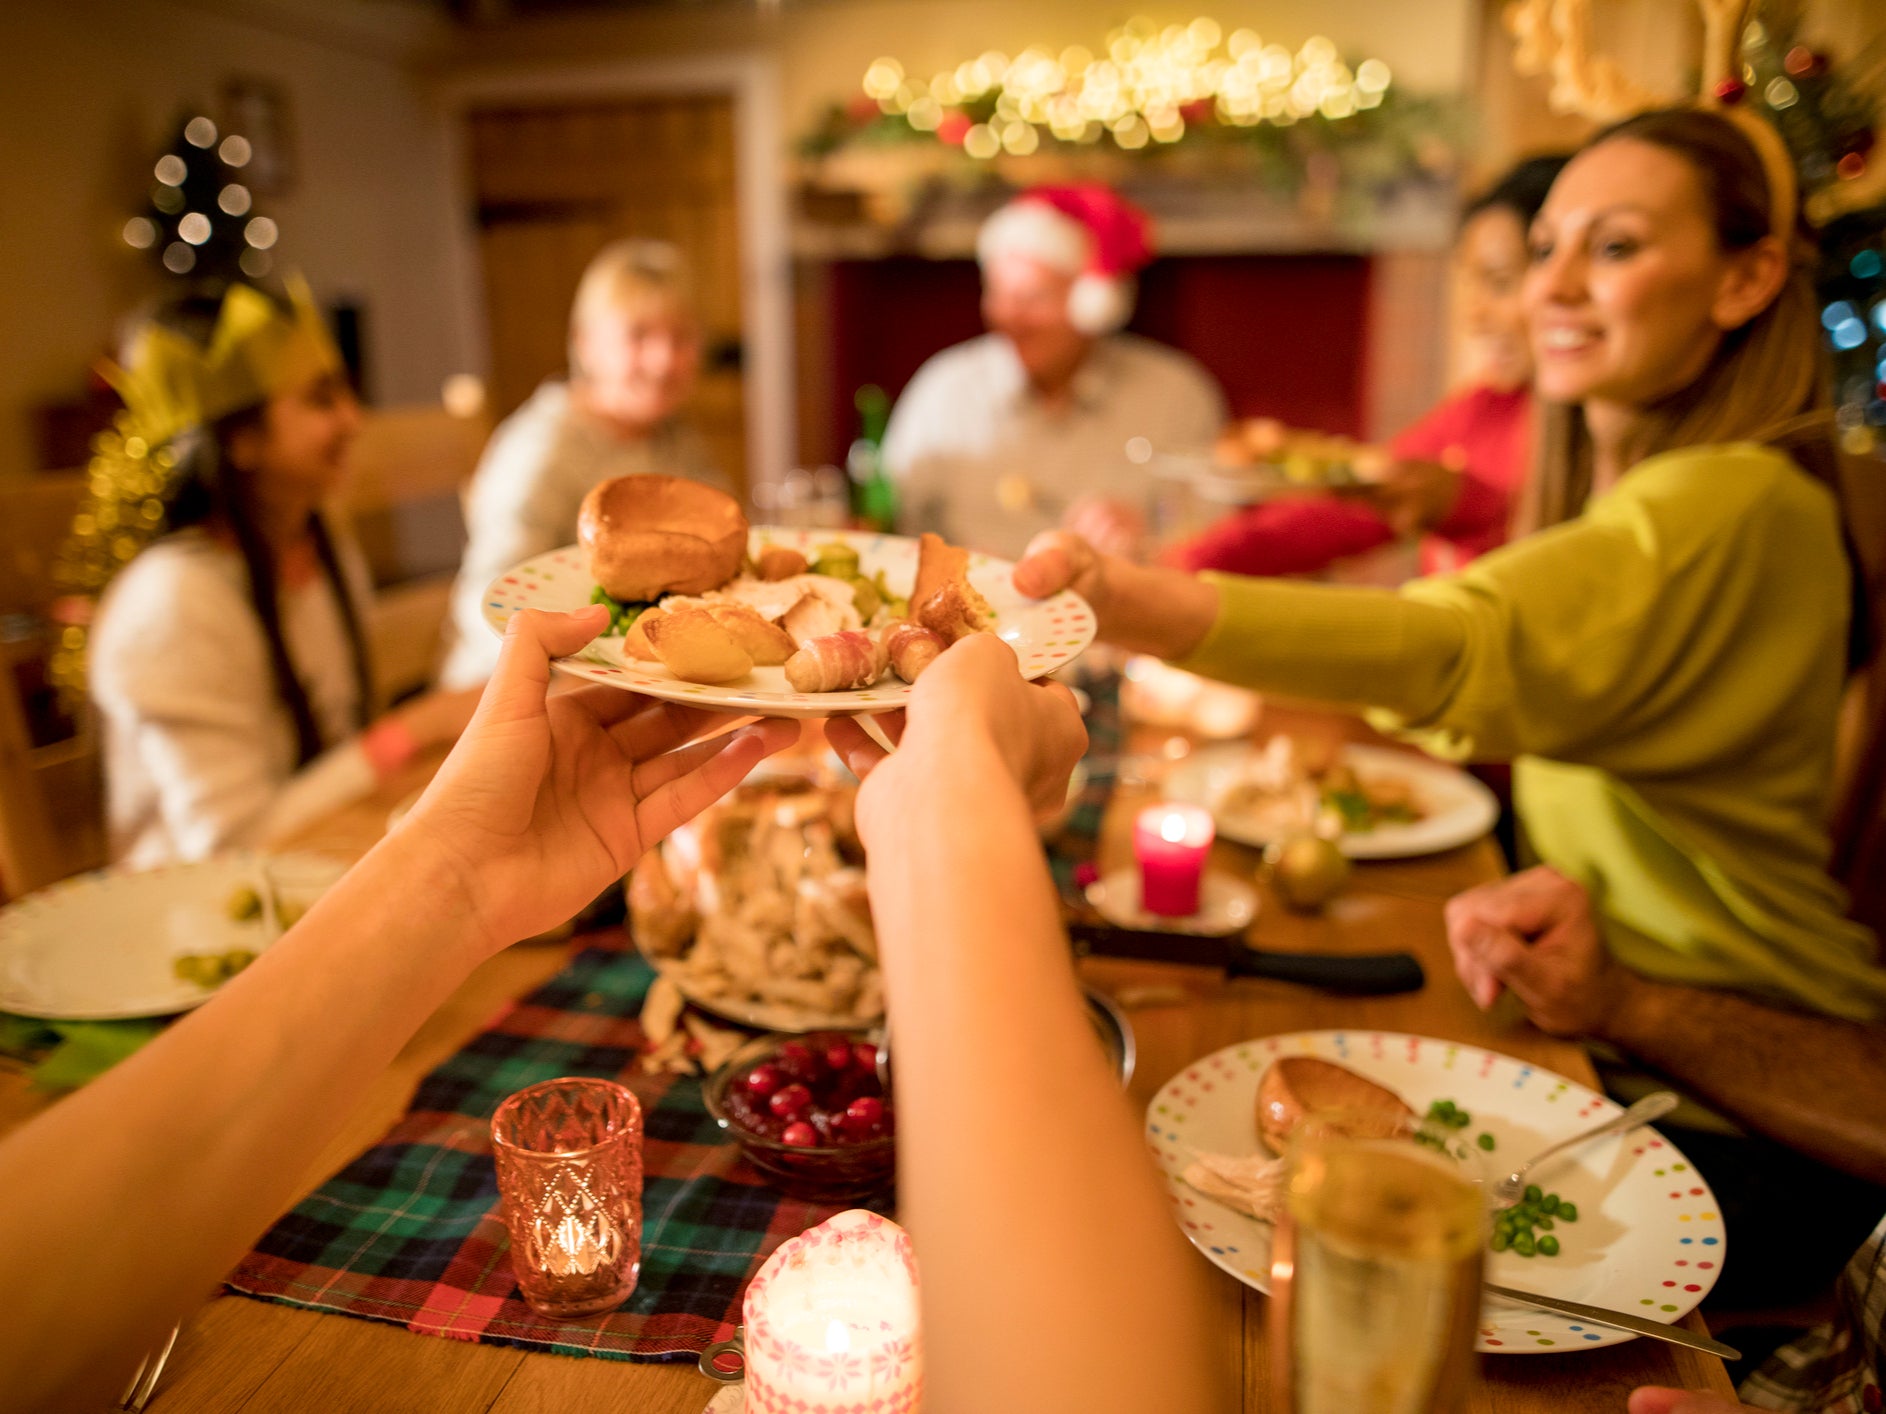 The cost of popular Christmas dinner items has risen sharply, research suggests